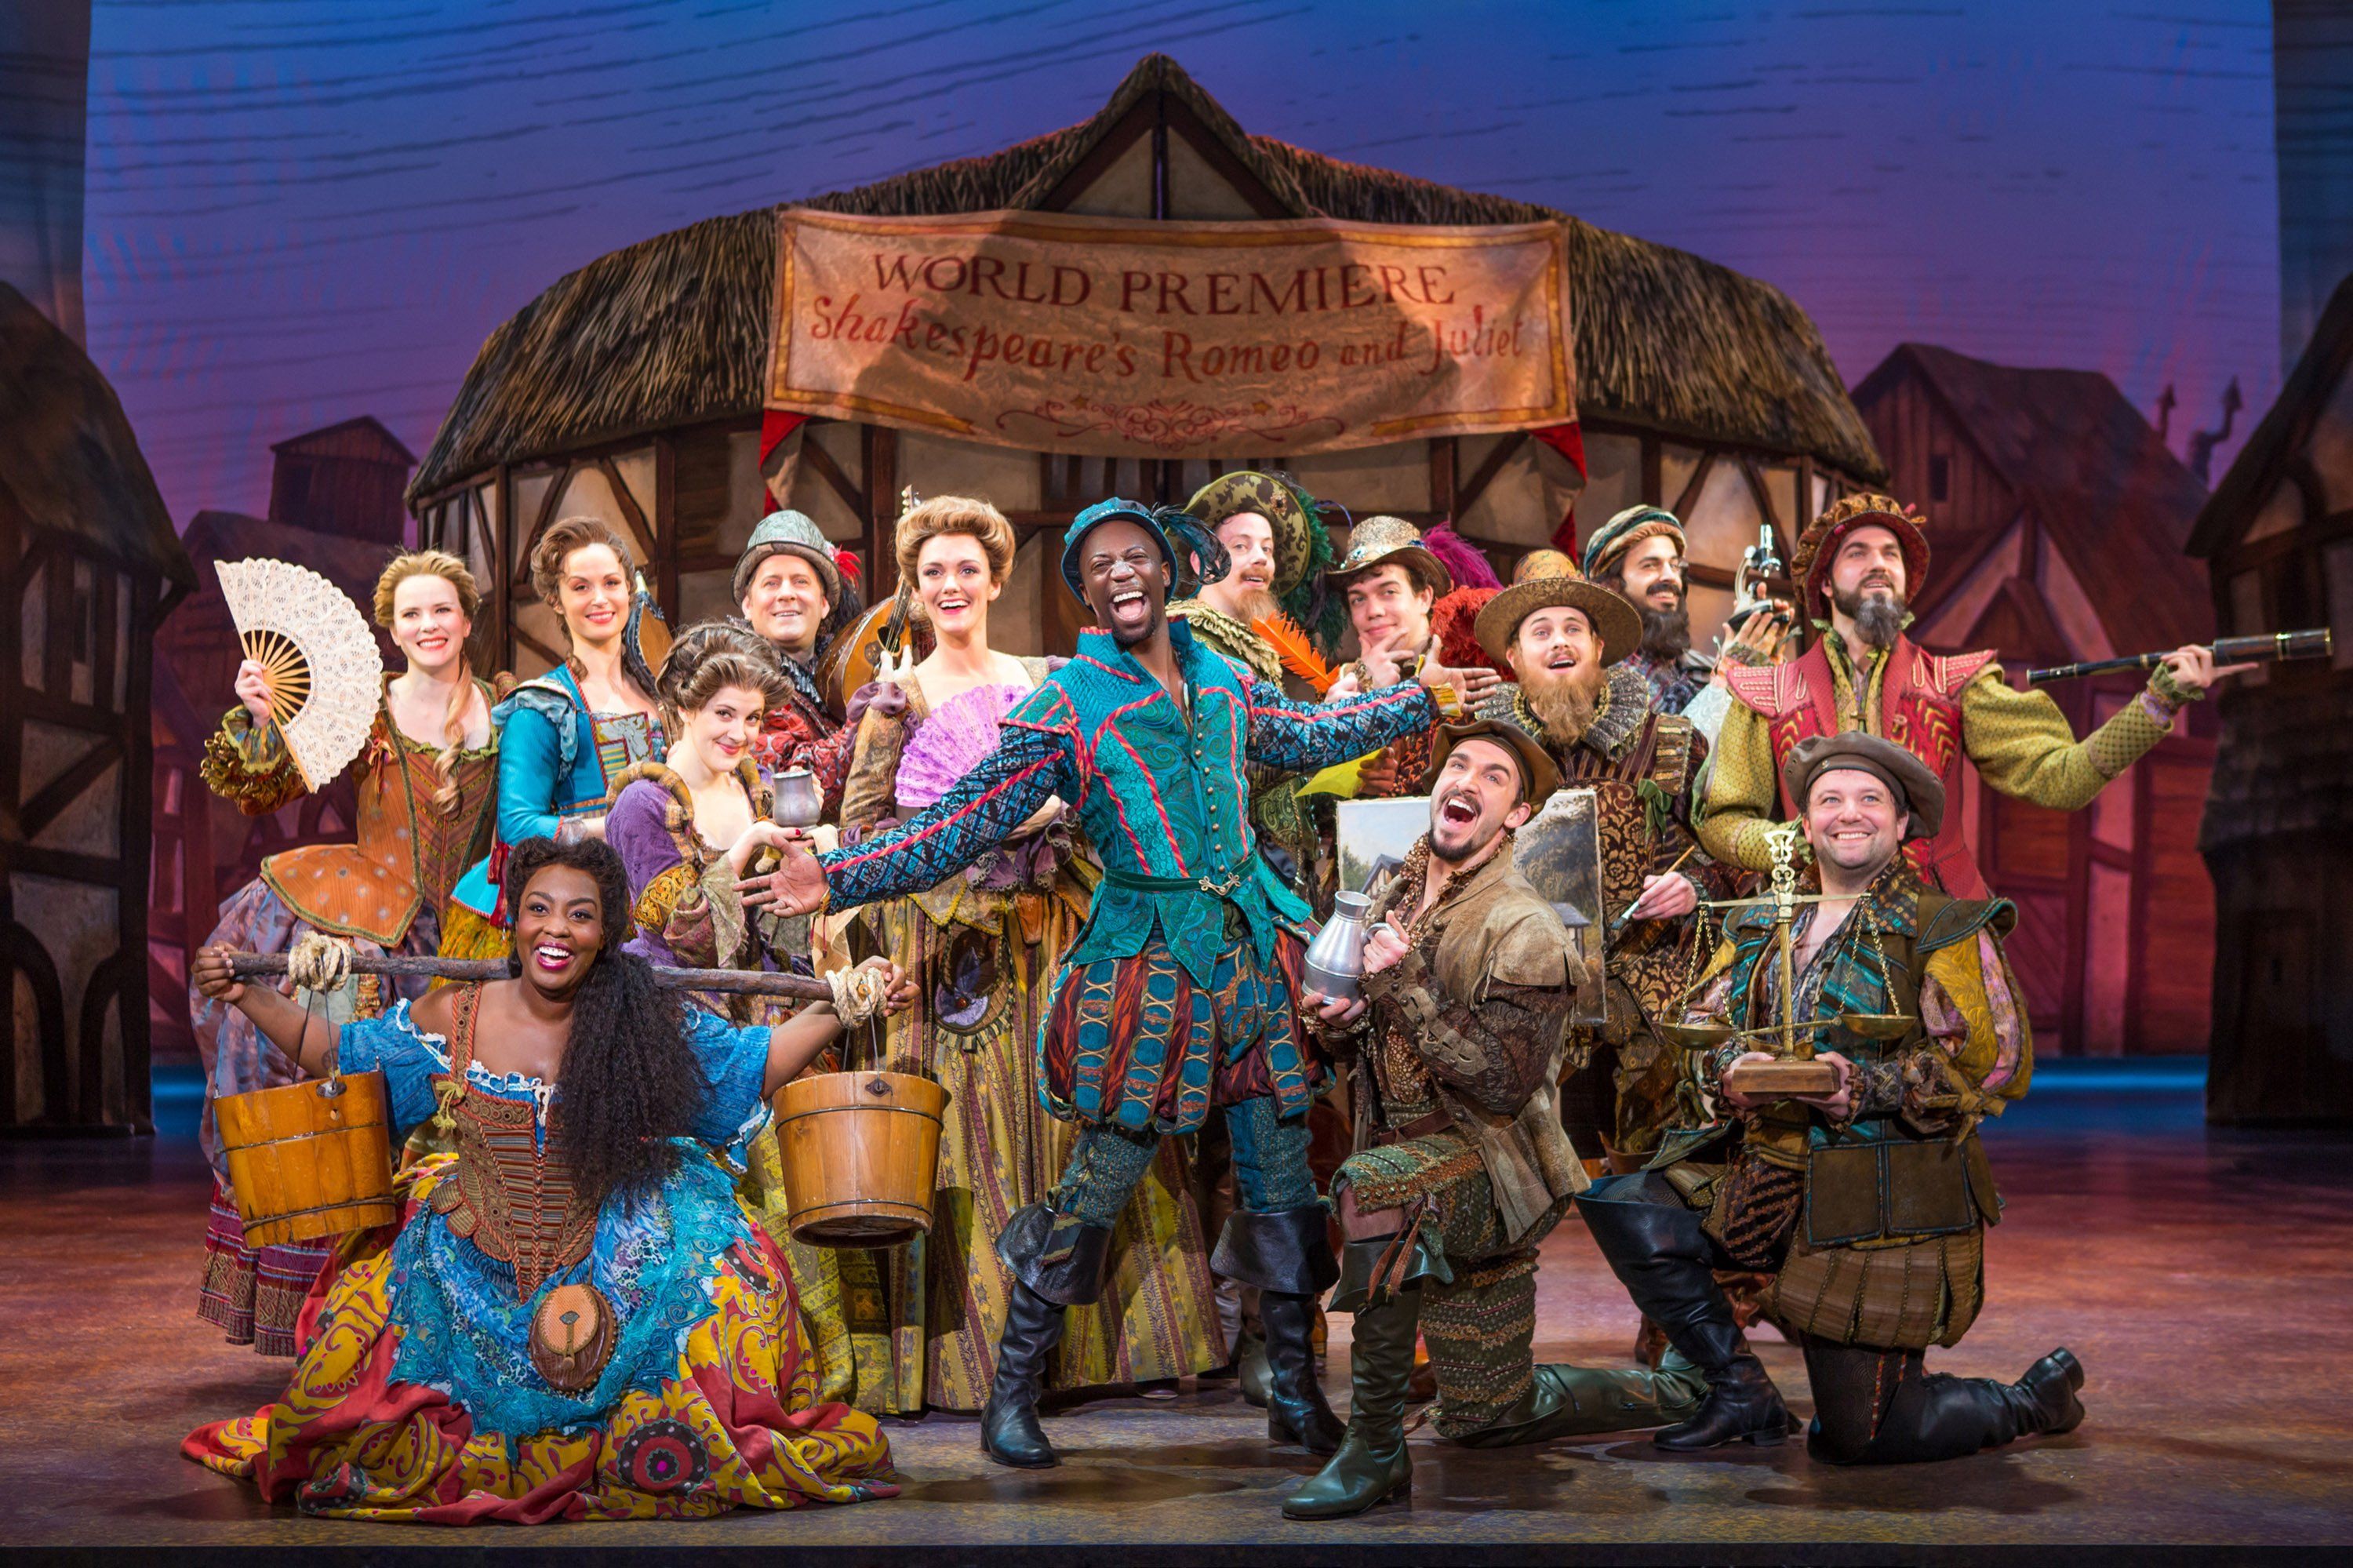 Yea, verily, Shakespeare jests abound in 5th Avenues zany Something Rotten! The Seattle Times pic